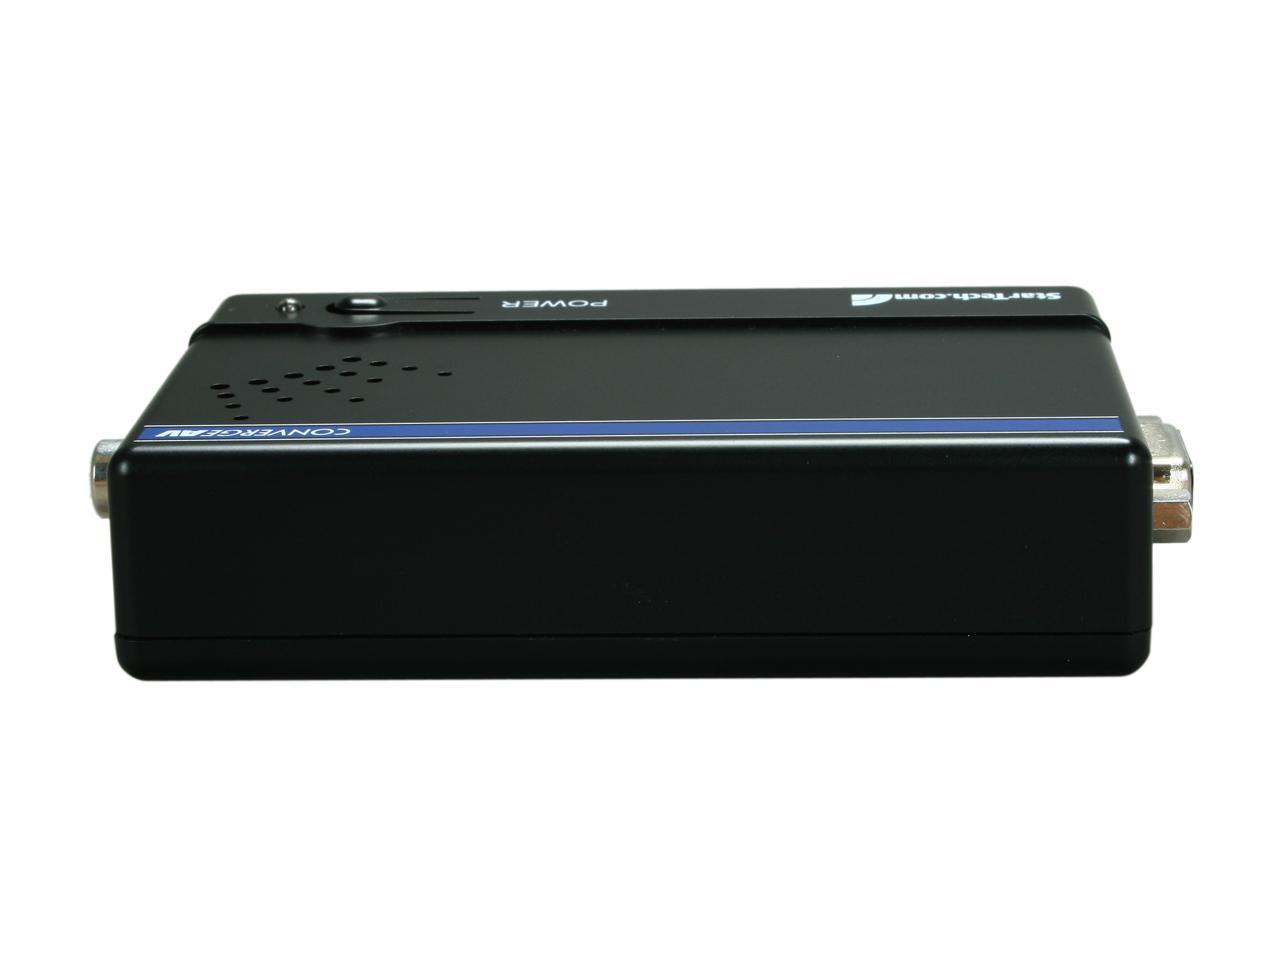 StarTech.com VGA2VID High Resolution VGA to Composite (RCA) or S-Video Converter - PC to TV Video Adapter - 1600x1200 RGB to TV